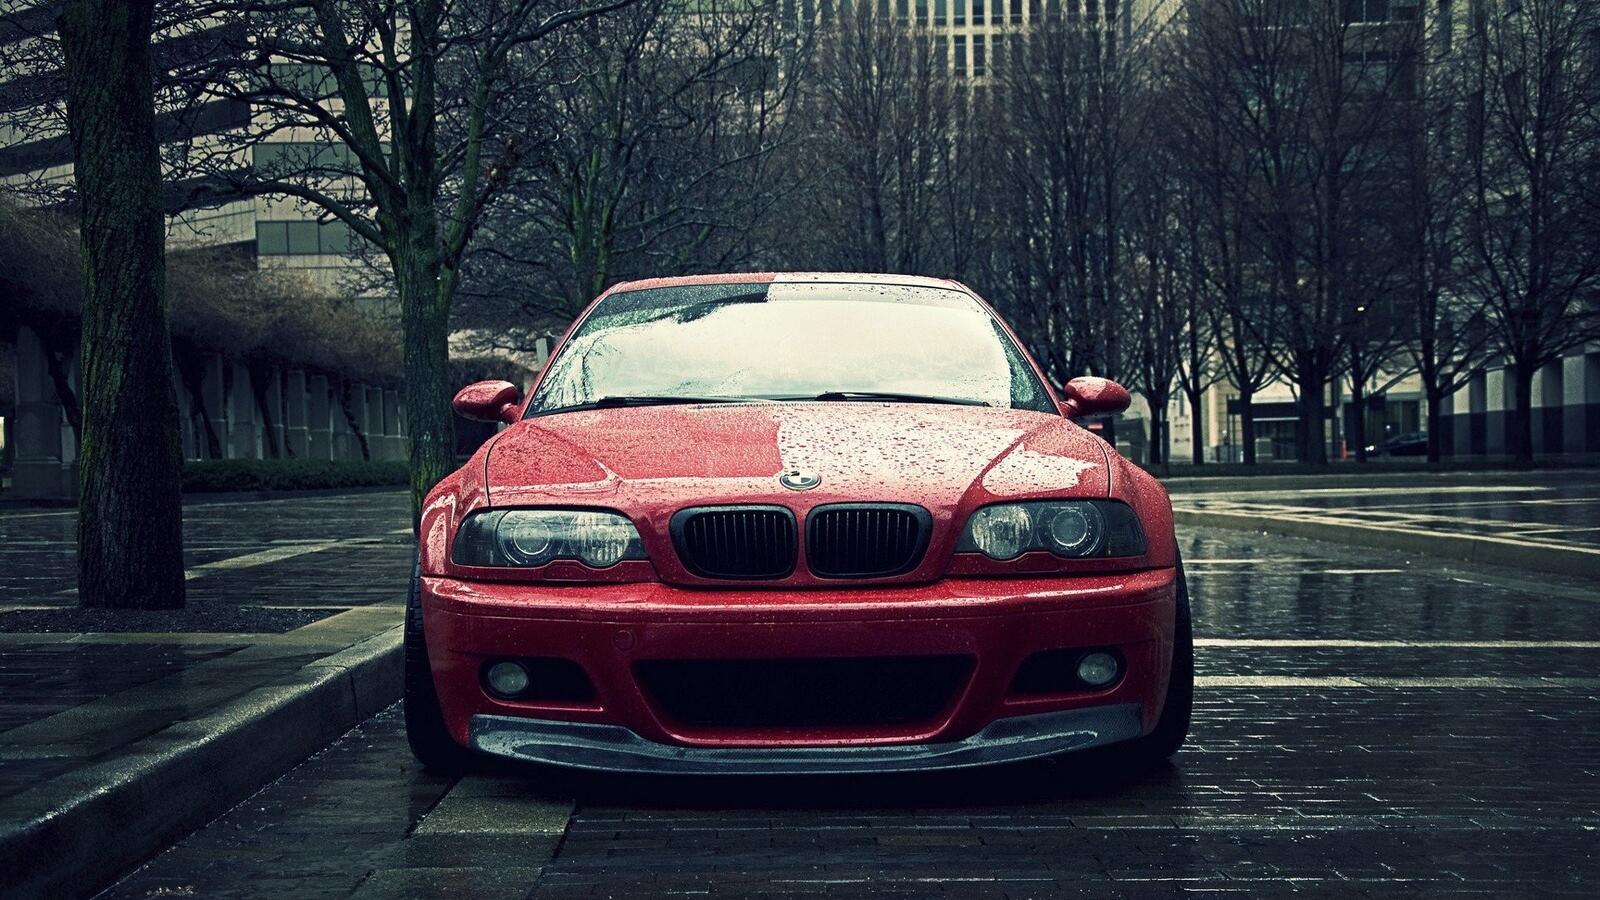 Wallpapers wallpaper bmw e46 front view red car on the desktop